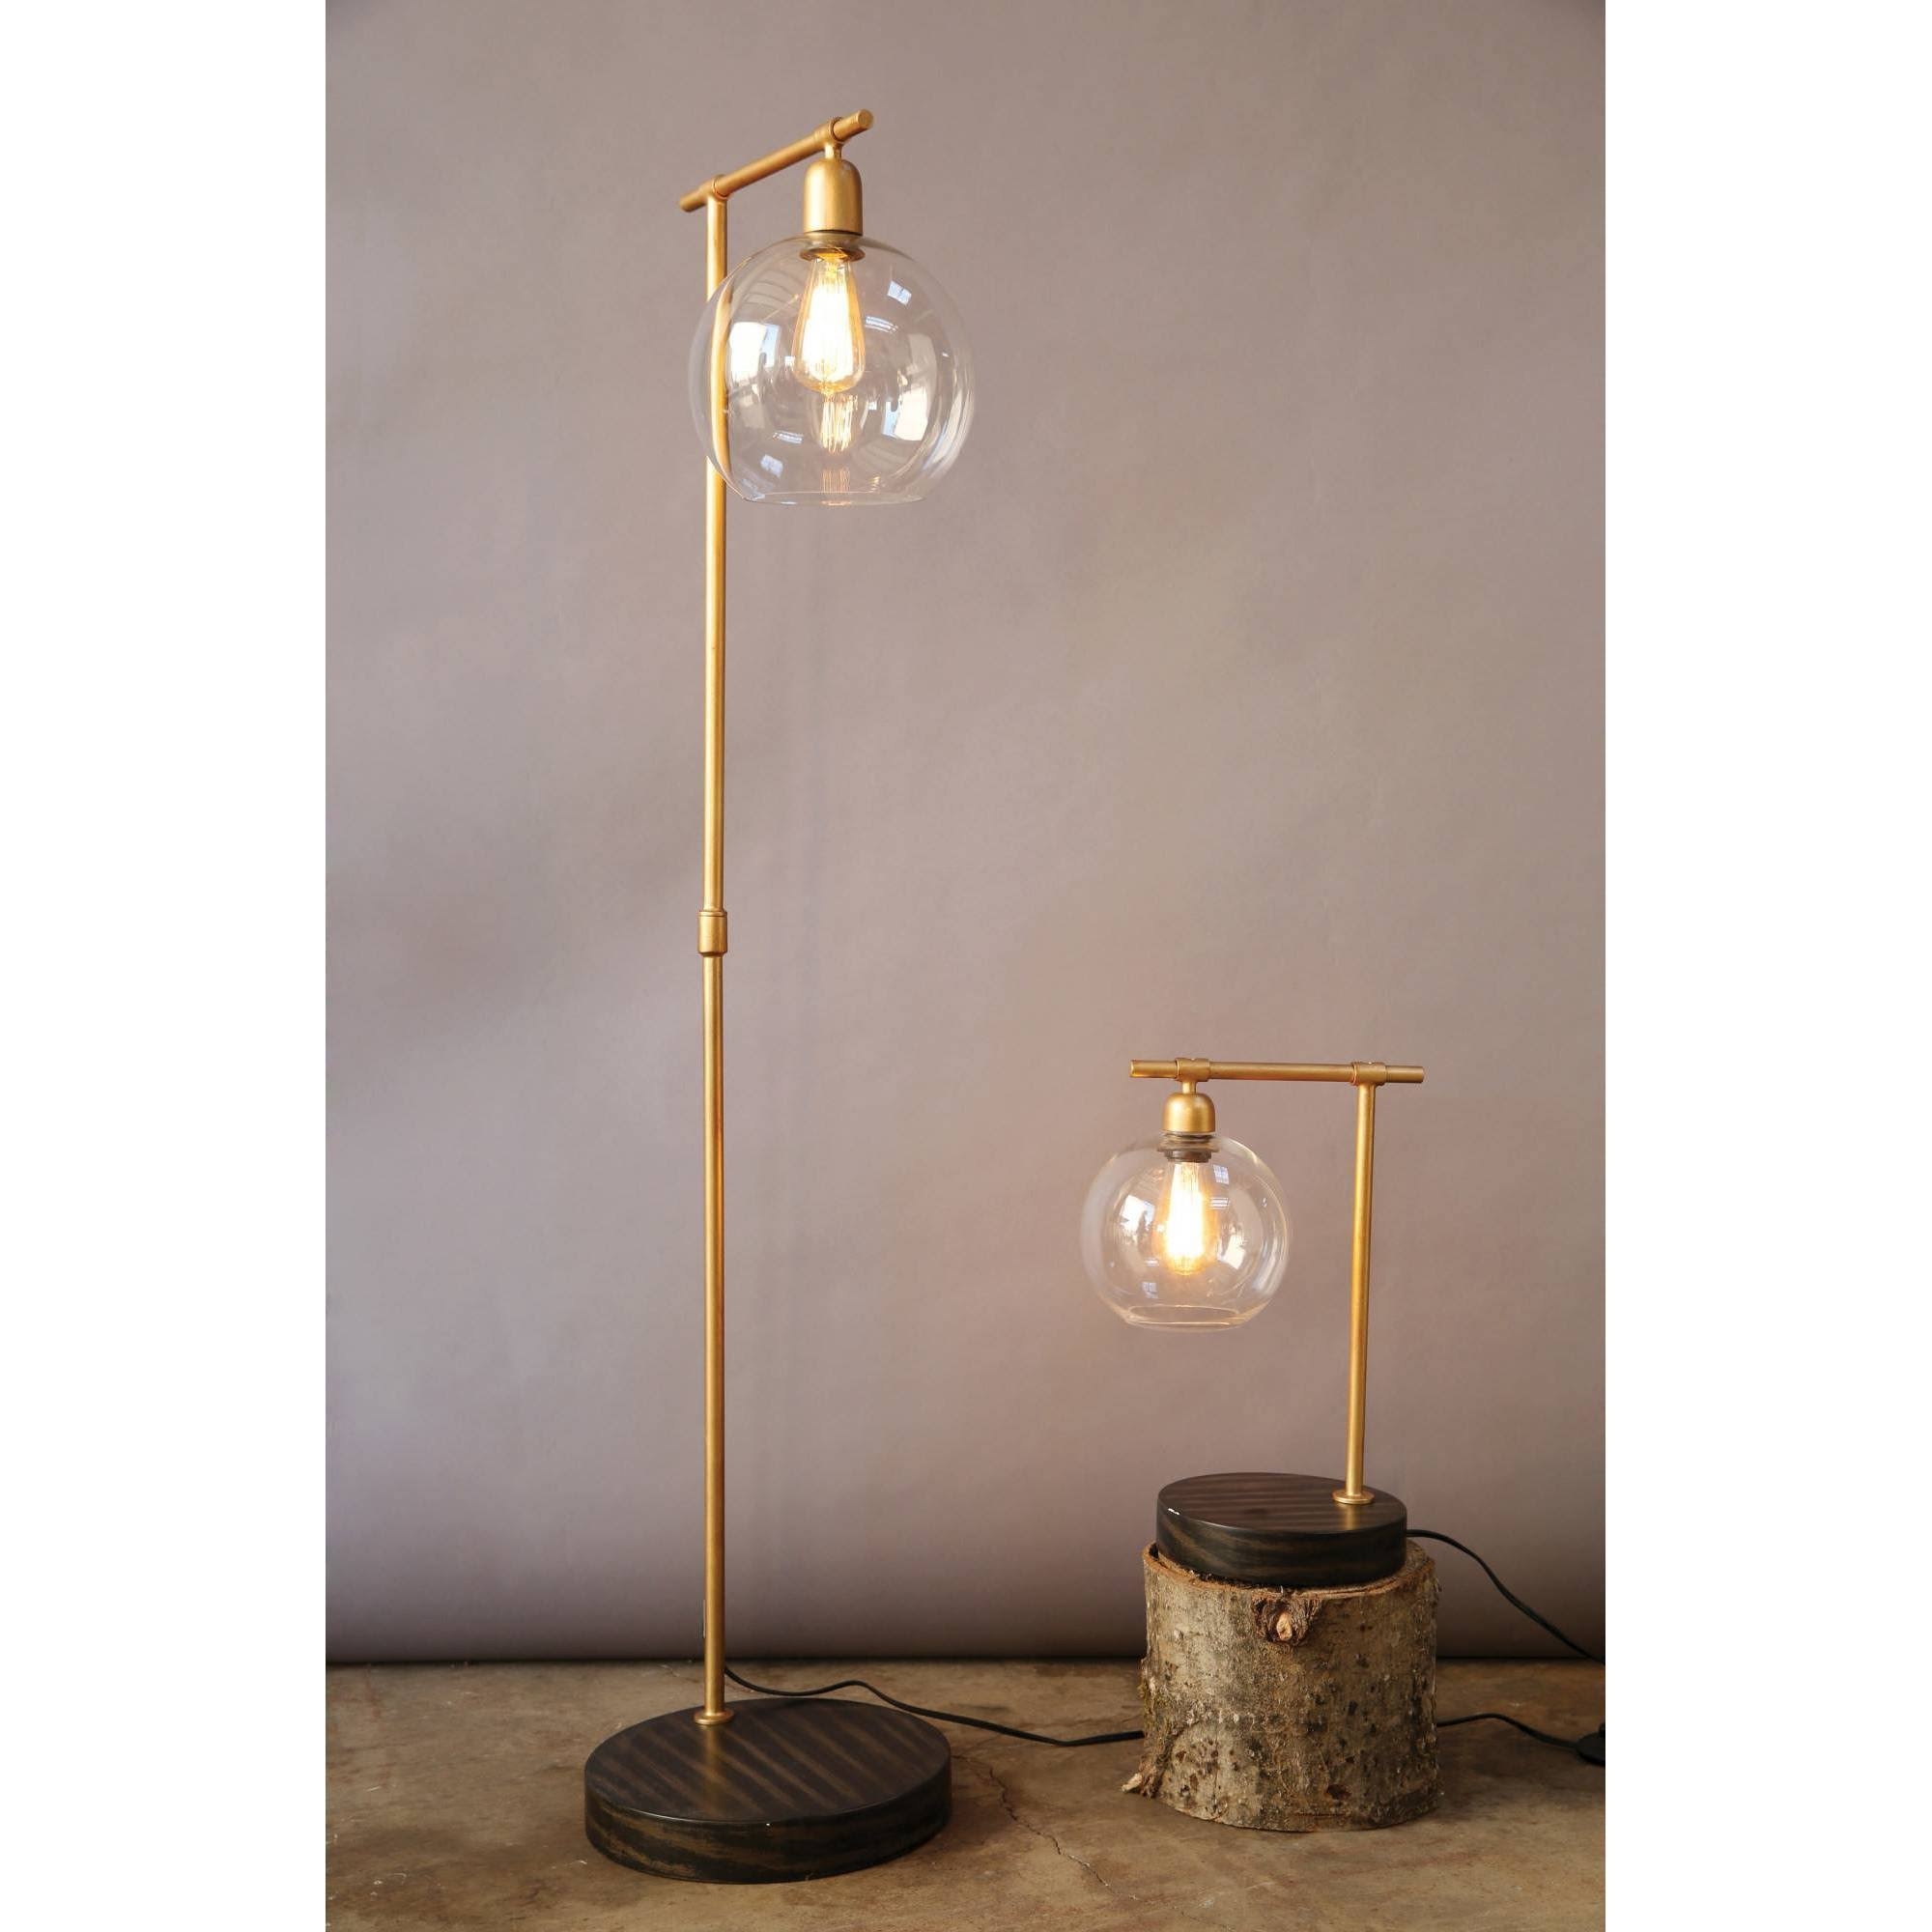 Metal & Wood Floor Lamp with Gold Finish and Glass Globe Shade - Image 1